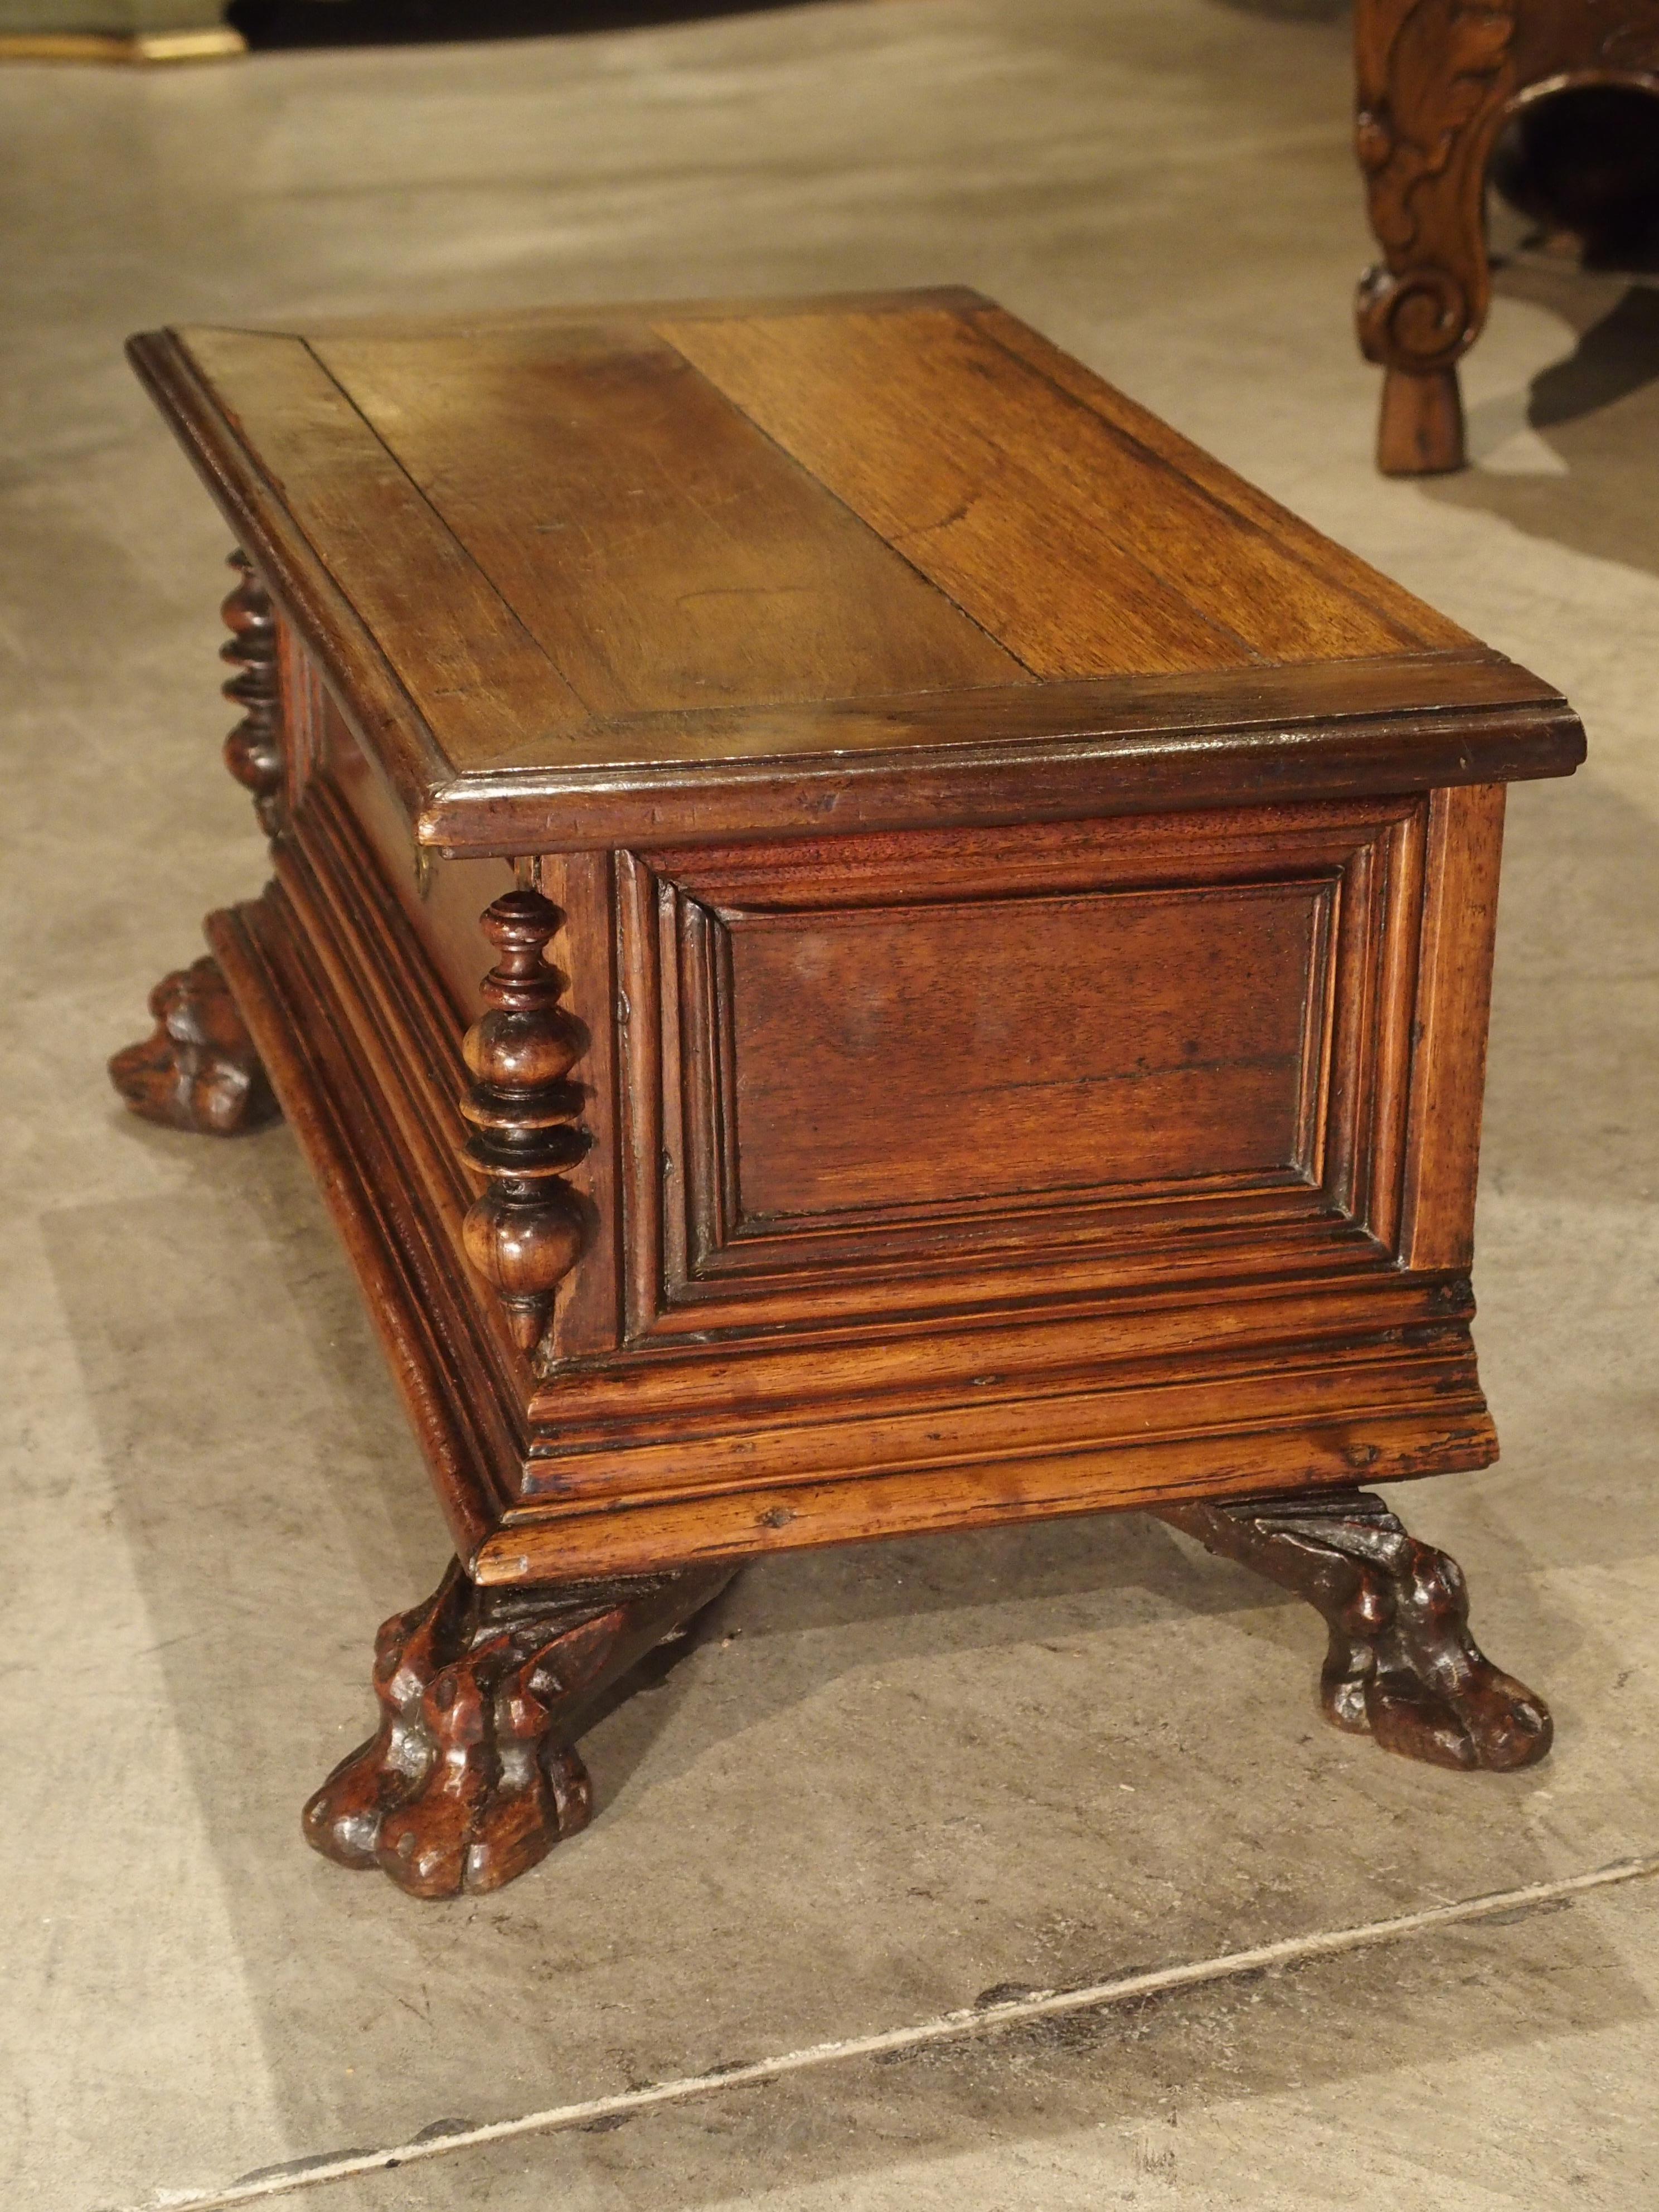 Italian Small Antique Walnut Wood Table Trunk from Northern Italy, circa 1700